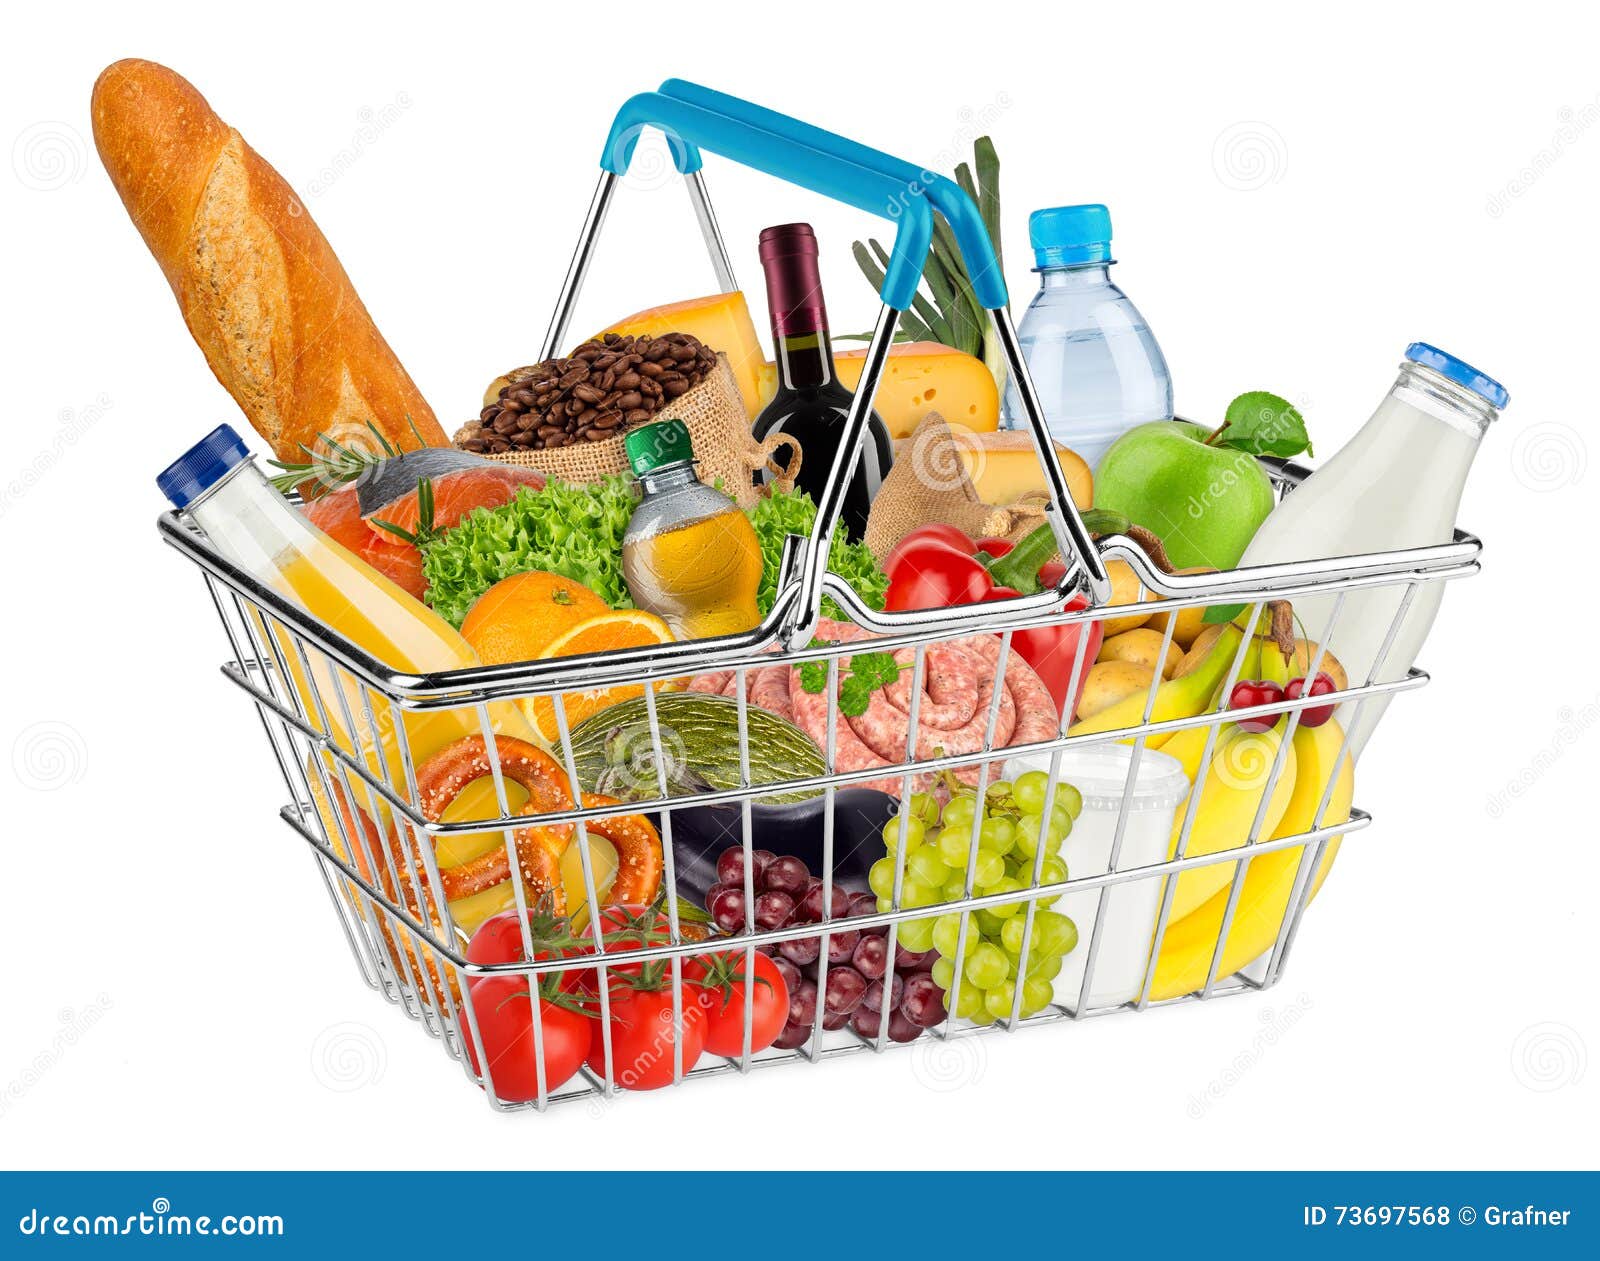  shopping basket filled with food